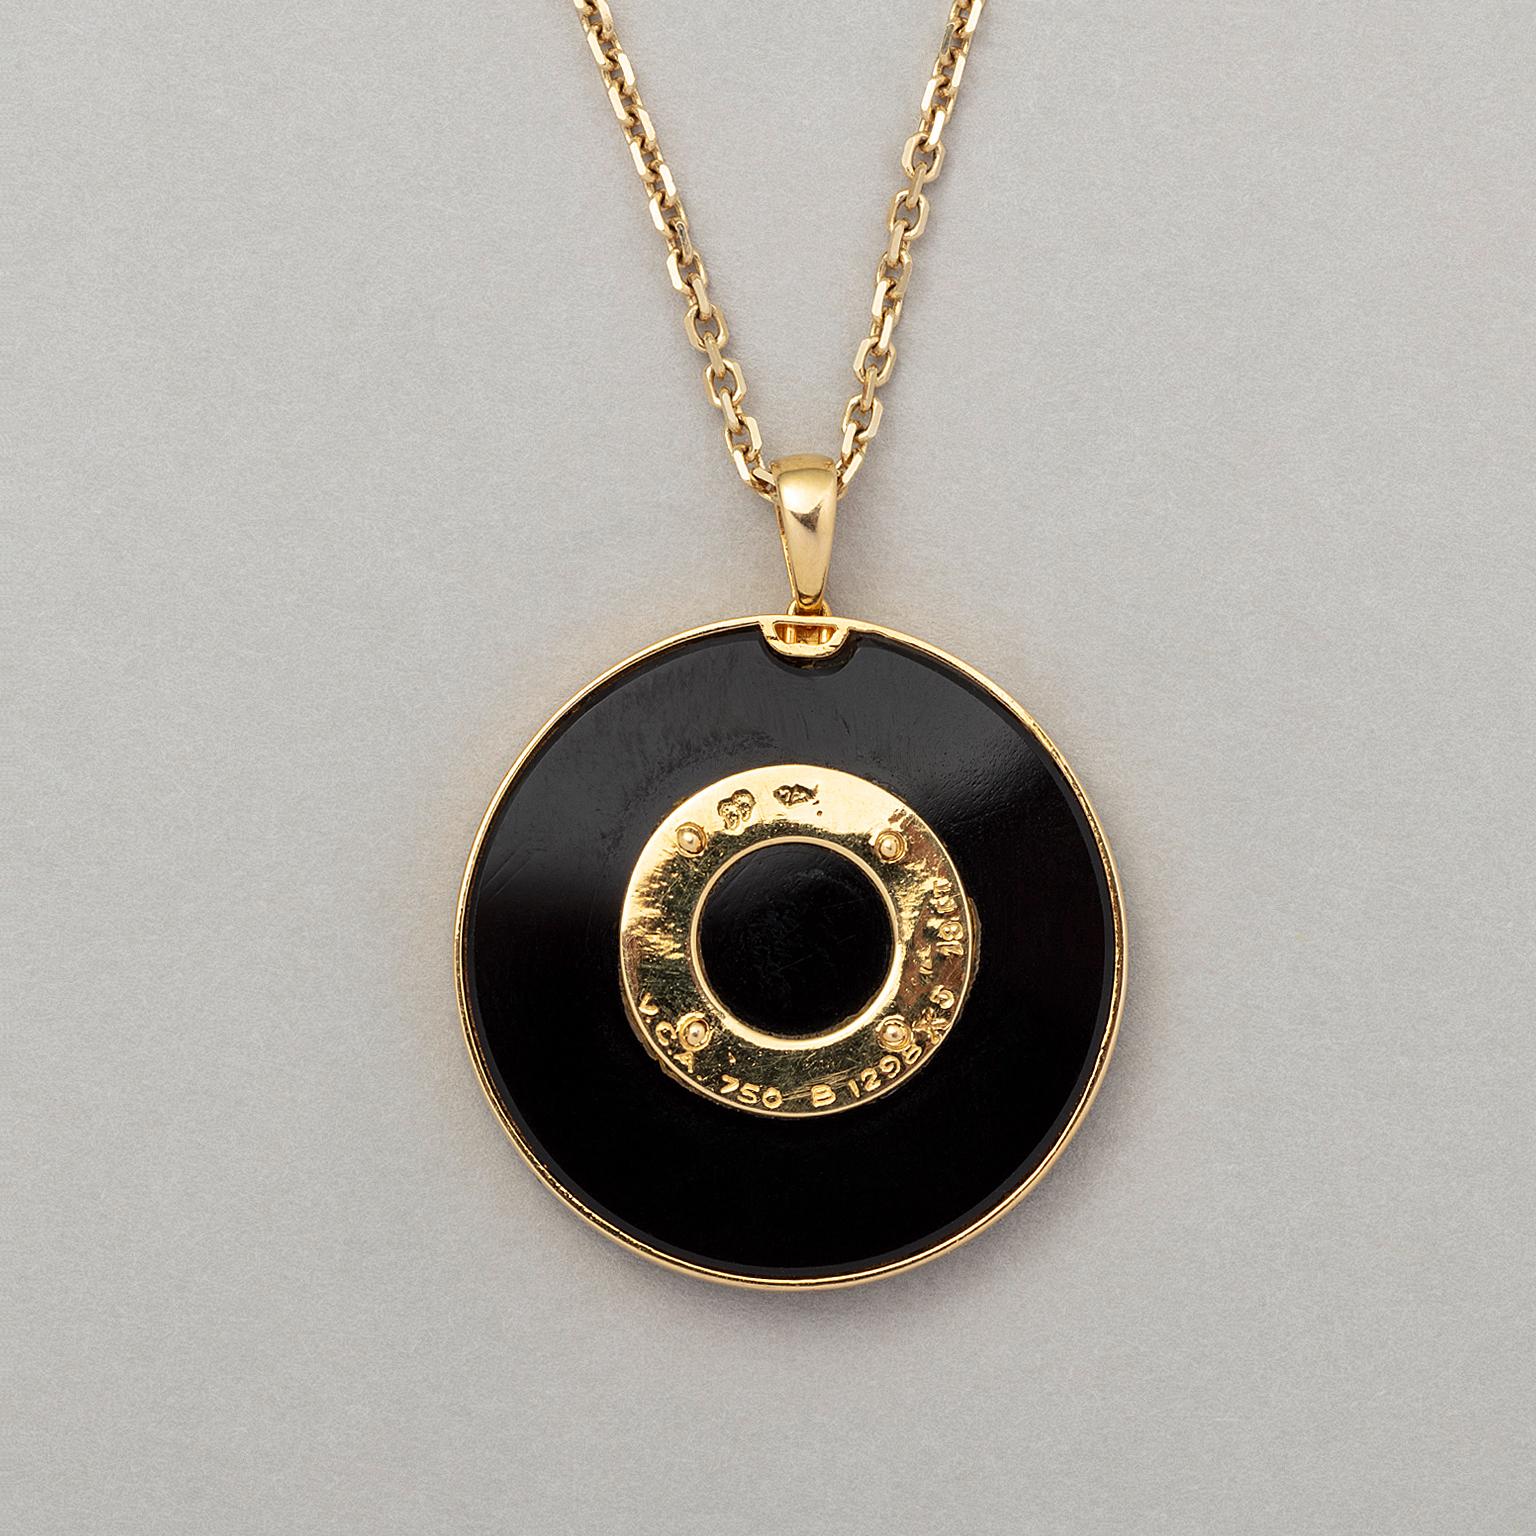 Mixed Cut 18 Carat Gold and Onyx Lucky Clover Van Cleef & Arpels Pendant